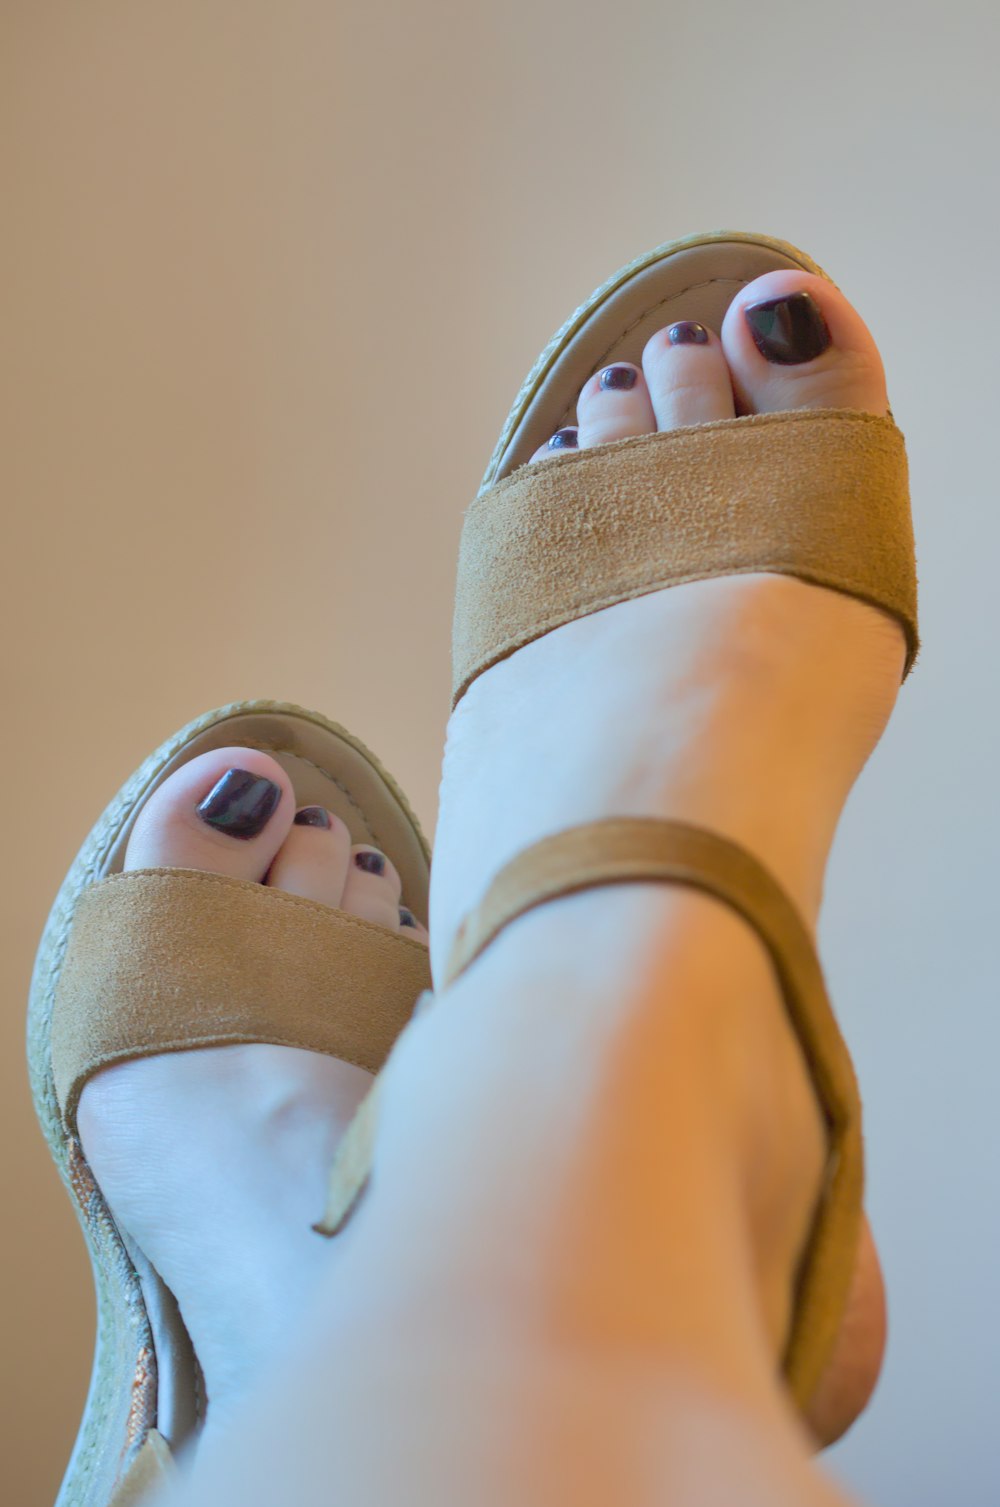 a close-up of a person's feet